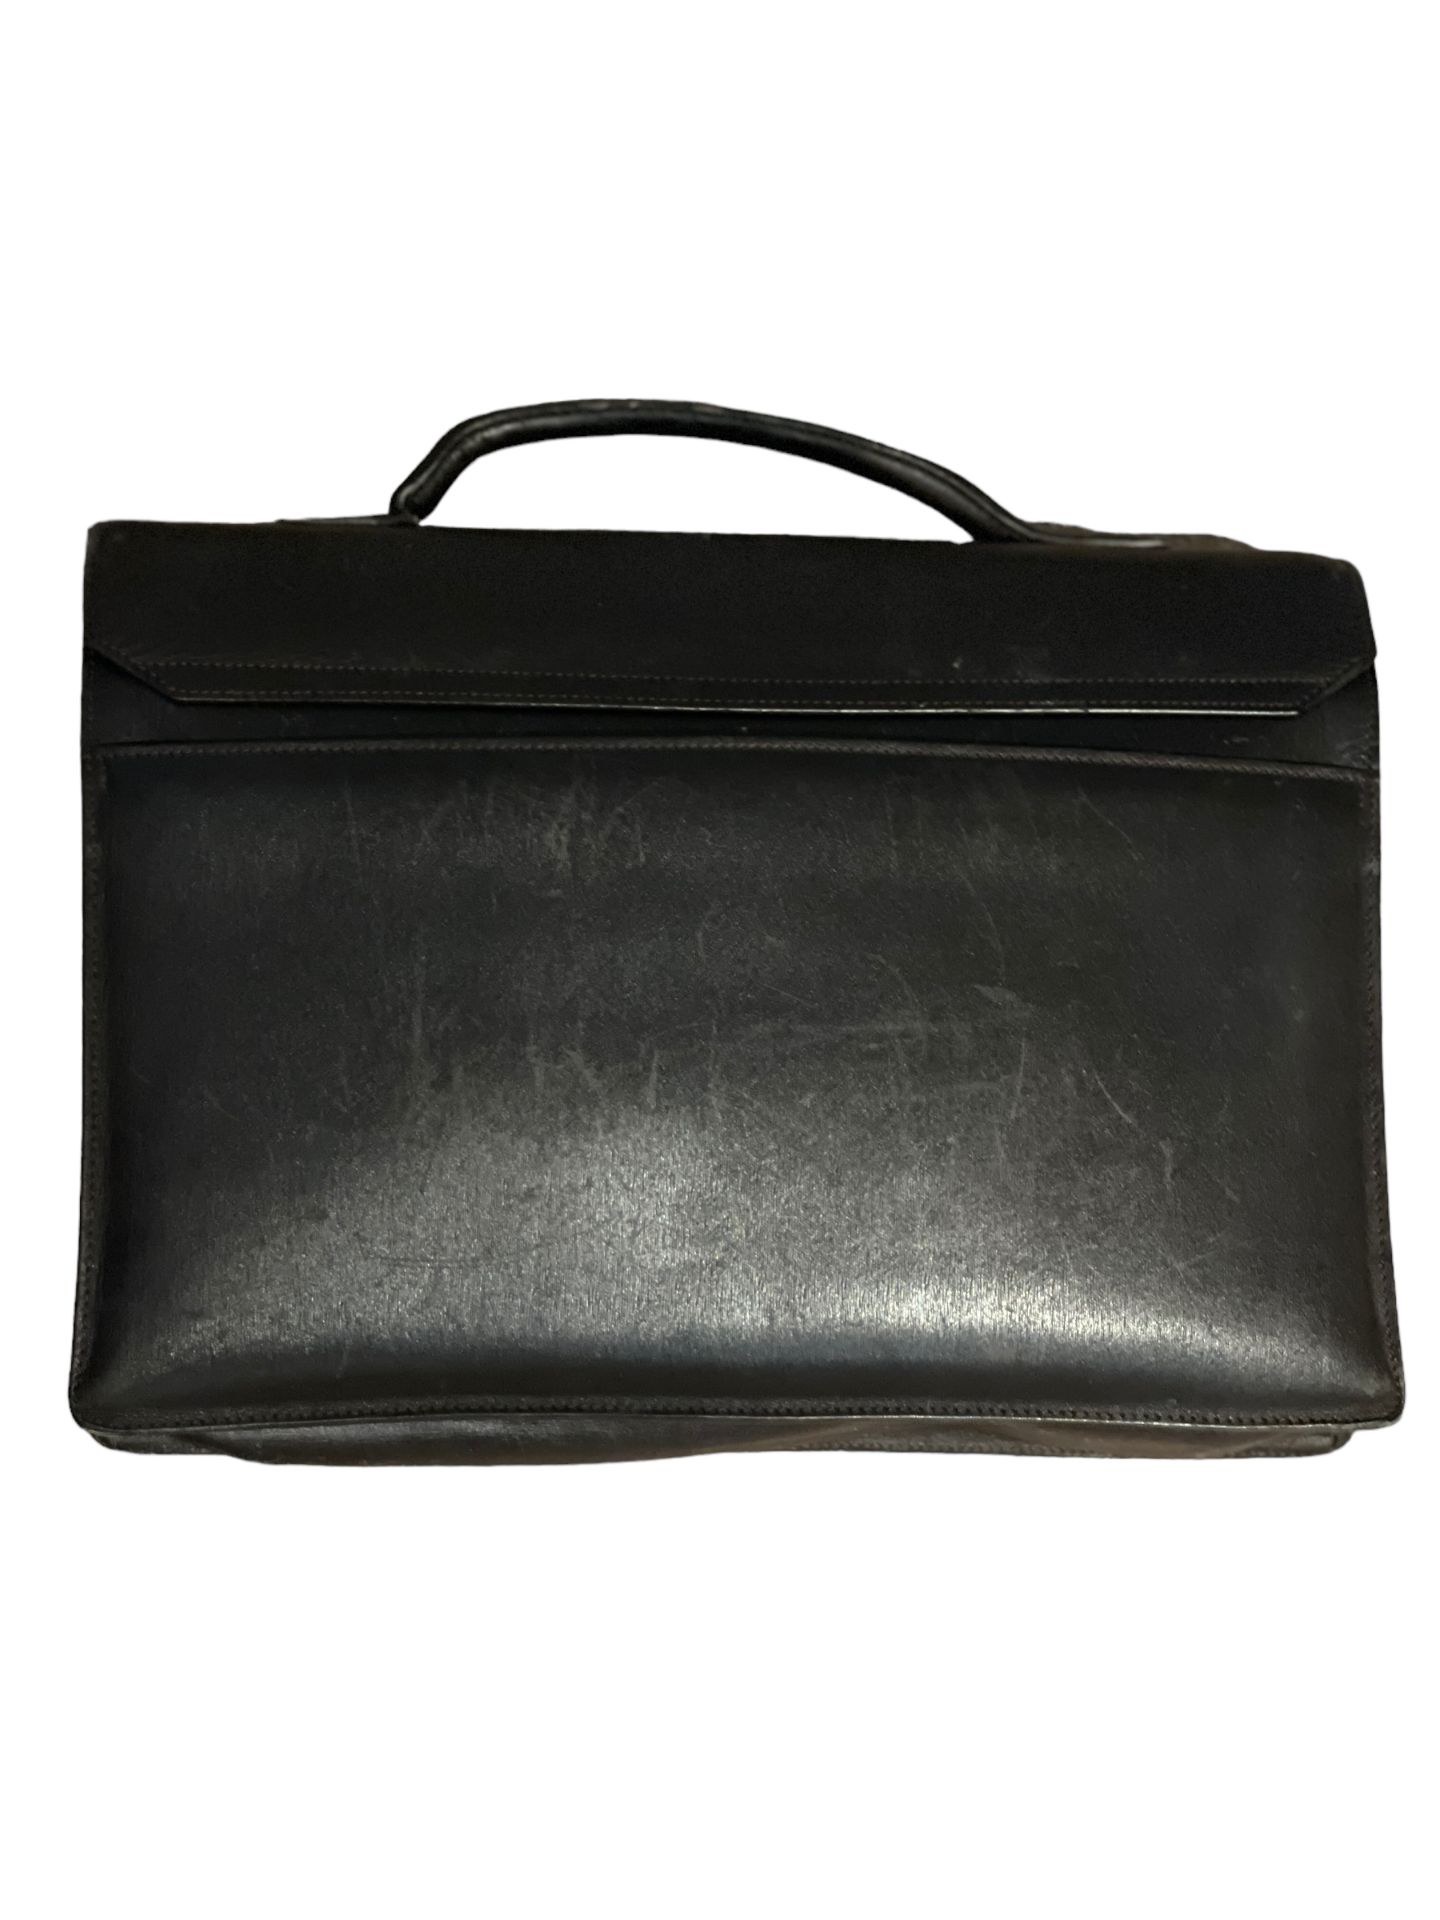 Dunhill Leather lost baggage from private. jet charter - Image 9 of 9